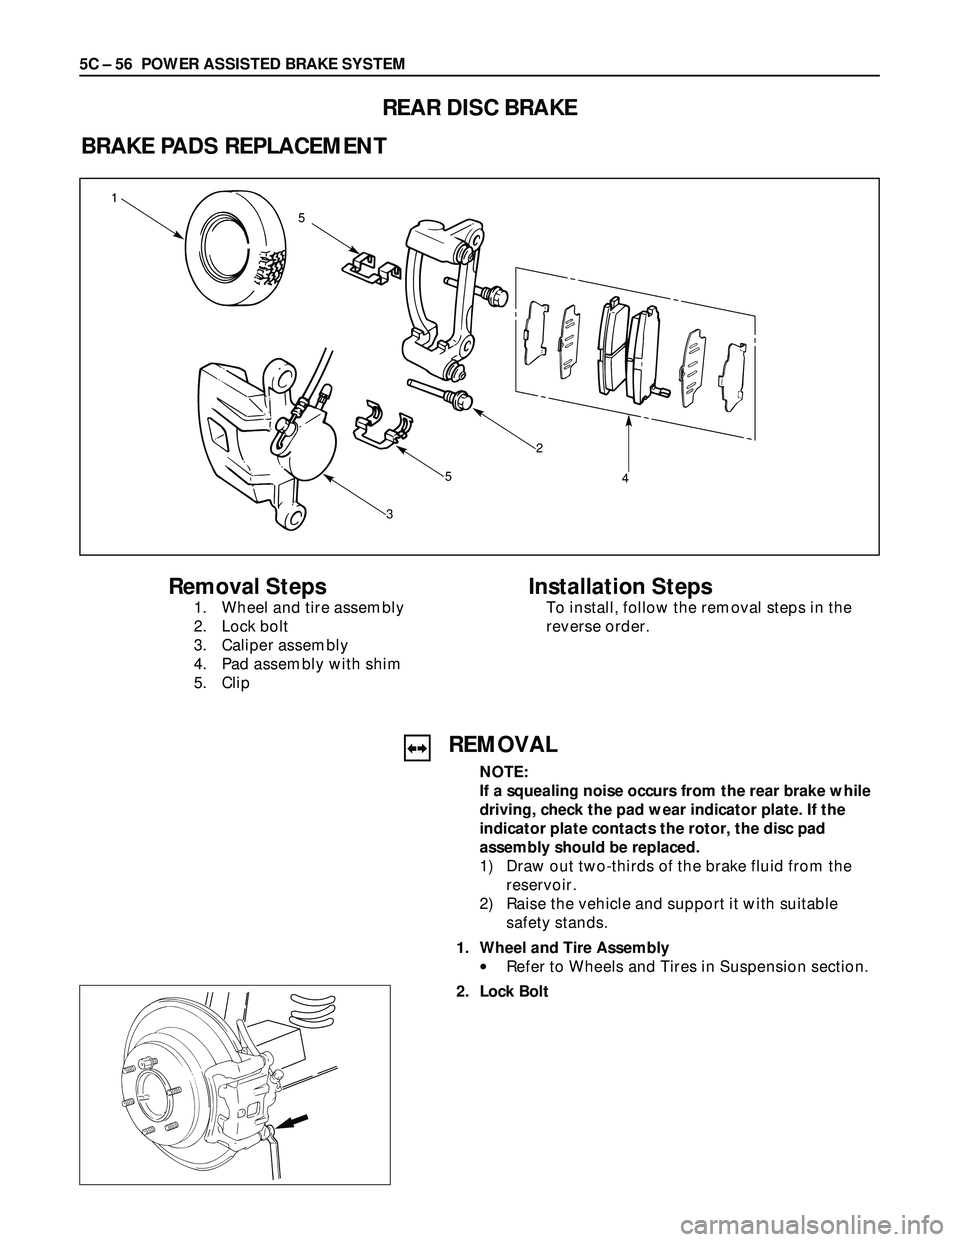 ISUZU TROOPER 1998  Service Repair Manual 5C – 56 POWER ASSISTED BRAKE SYSTEM
REAR DISC BRAKE
BRAKE PADS REPLACEMENT
1
5
5
3
2
4
Removal Steps
1. Wheel and tire assembly
2. Lock bolt
3. Caliper assembly
4. Pad assembly with shim
5. Clip
Ins